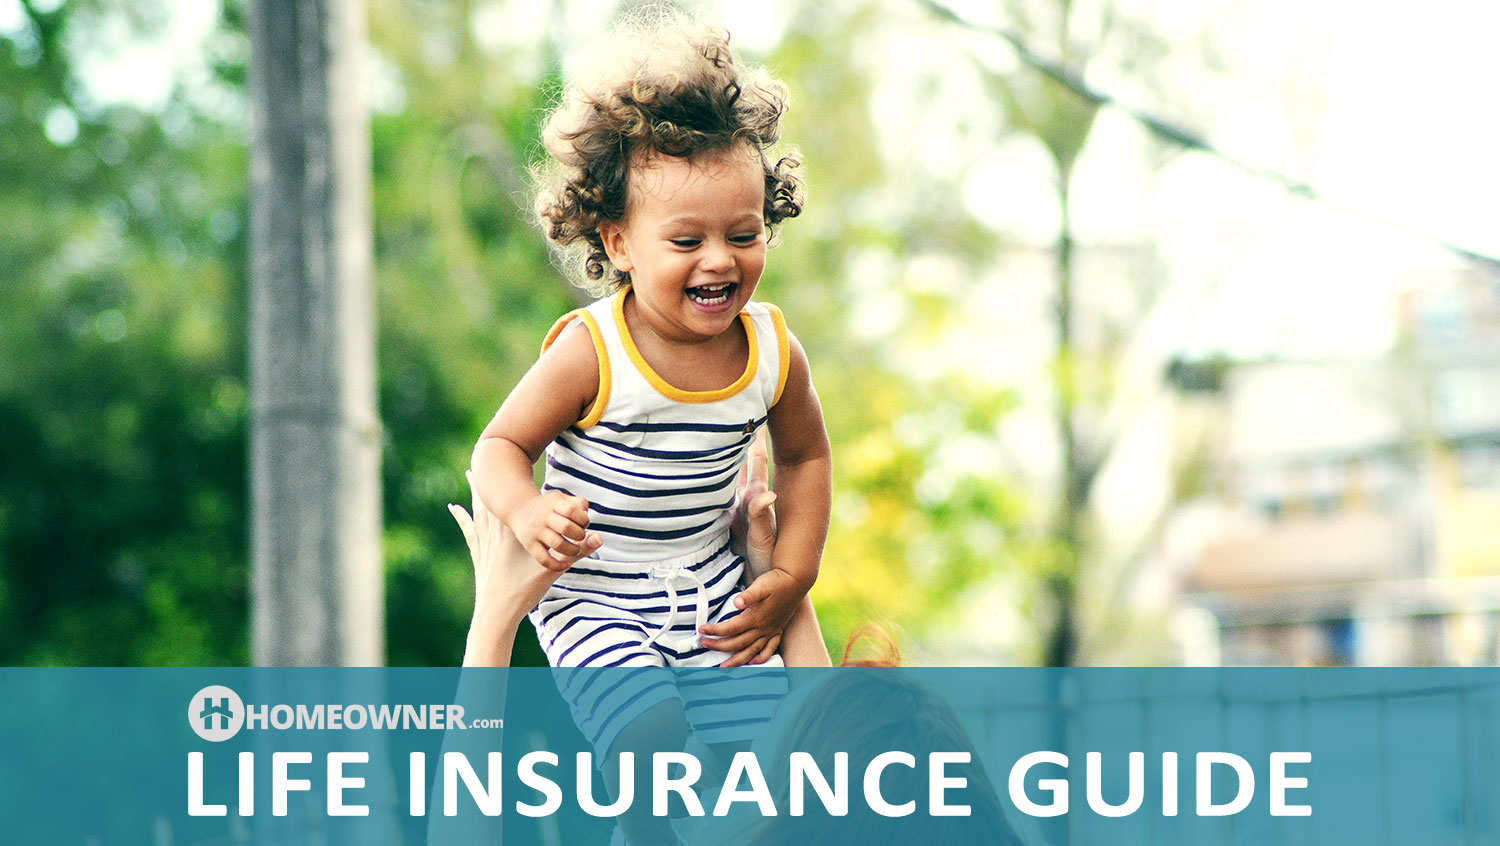 What Type of Life Insurance Do I Need?